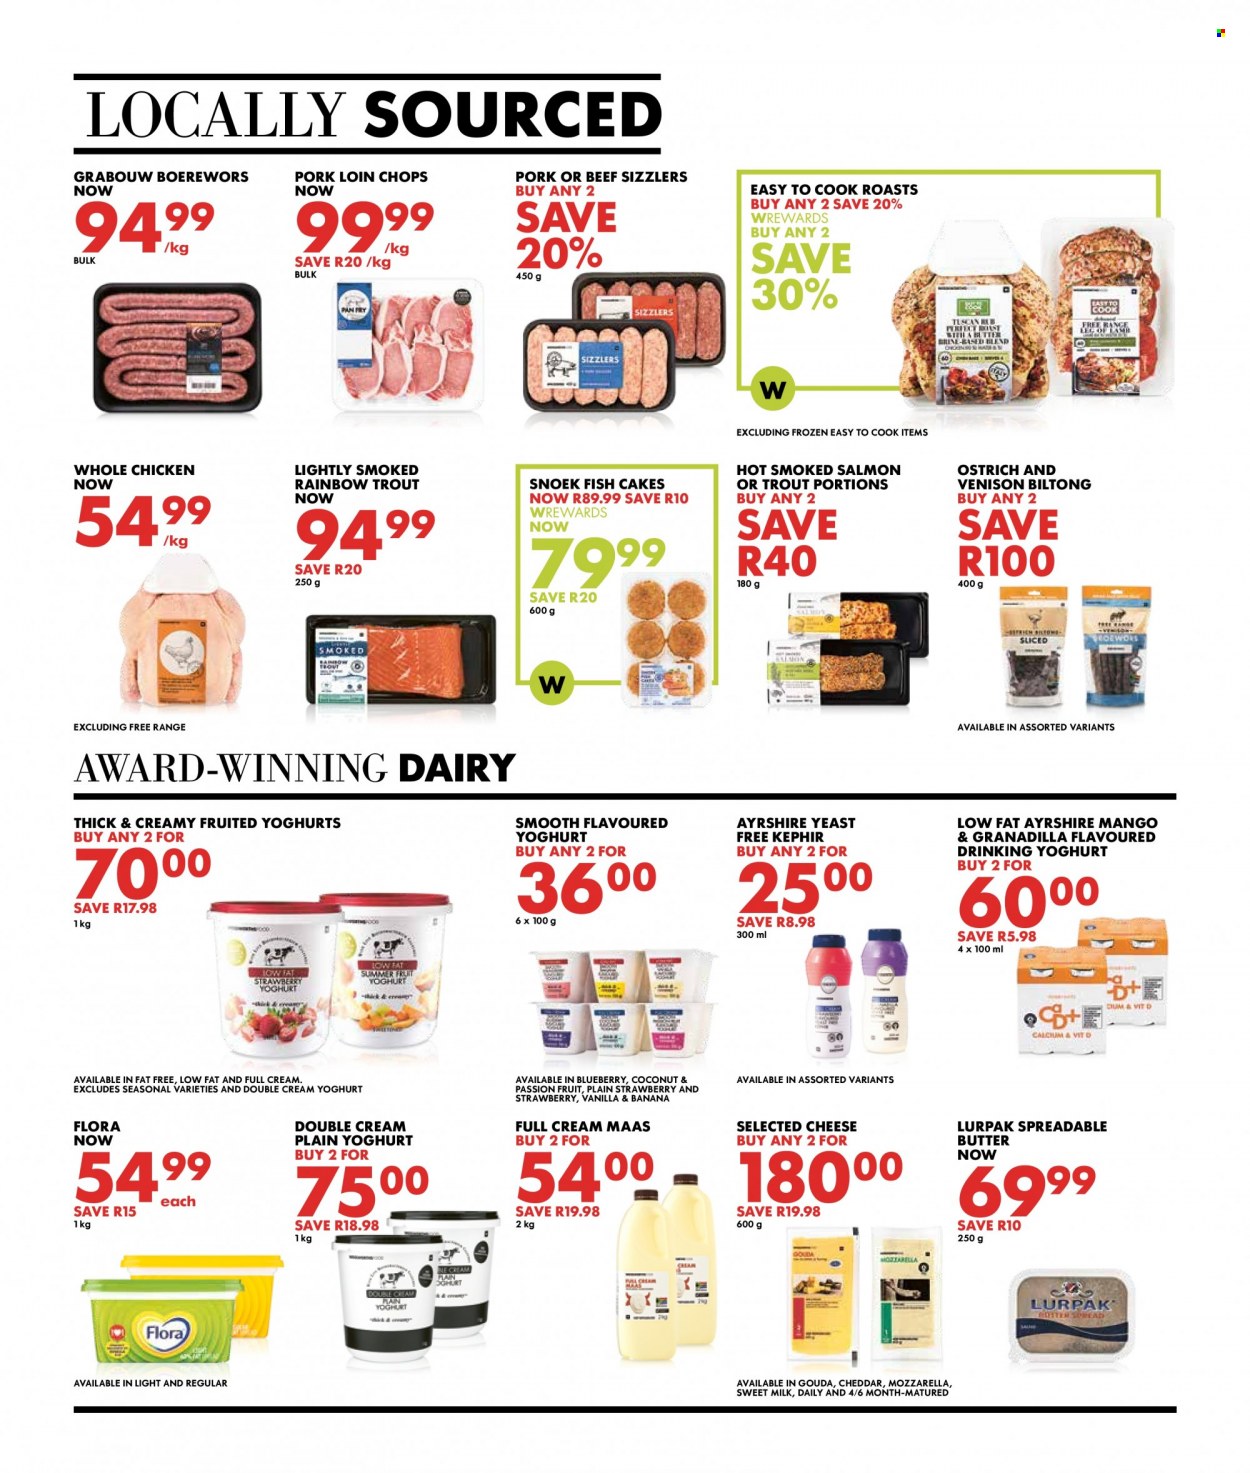 Woolworths specials - 05.23.2022 - 06.05.2022. 